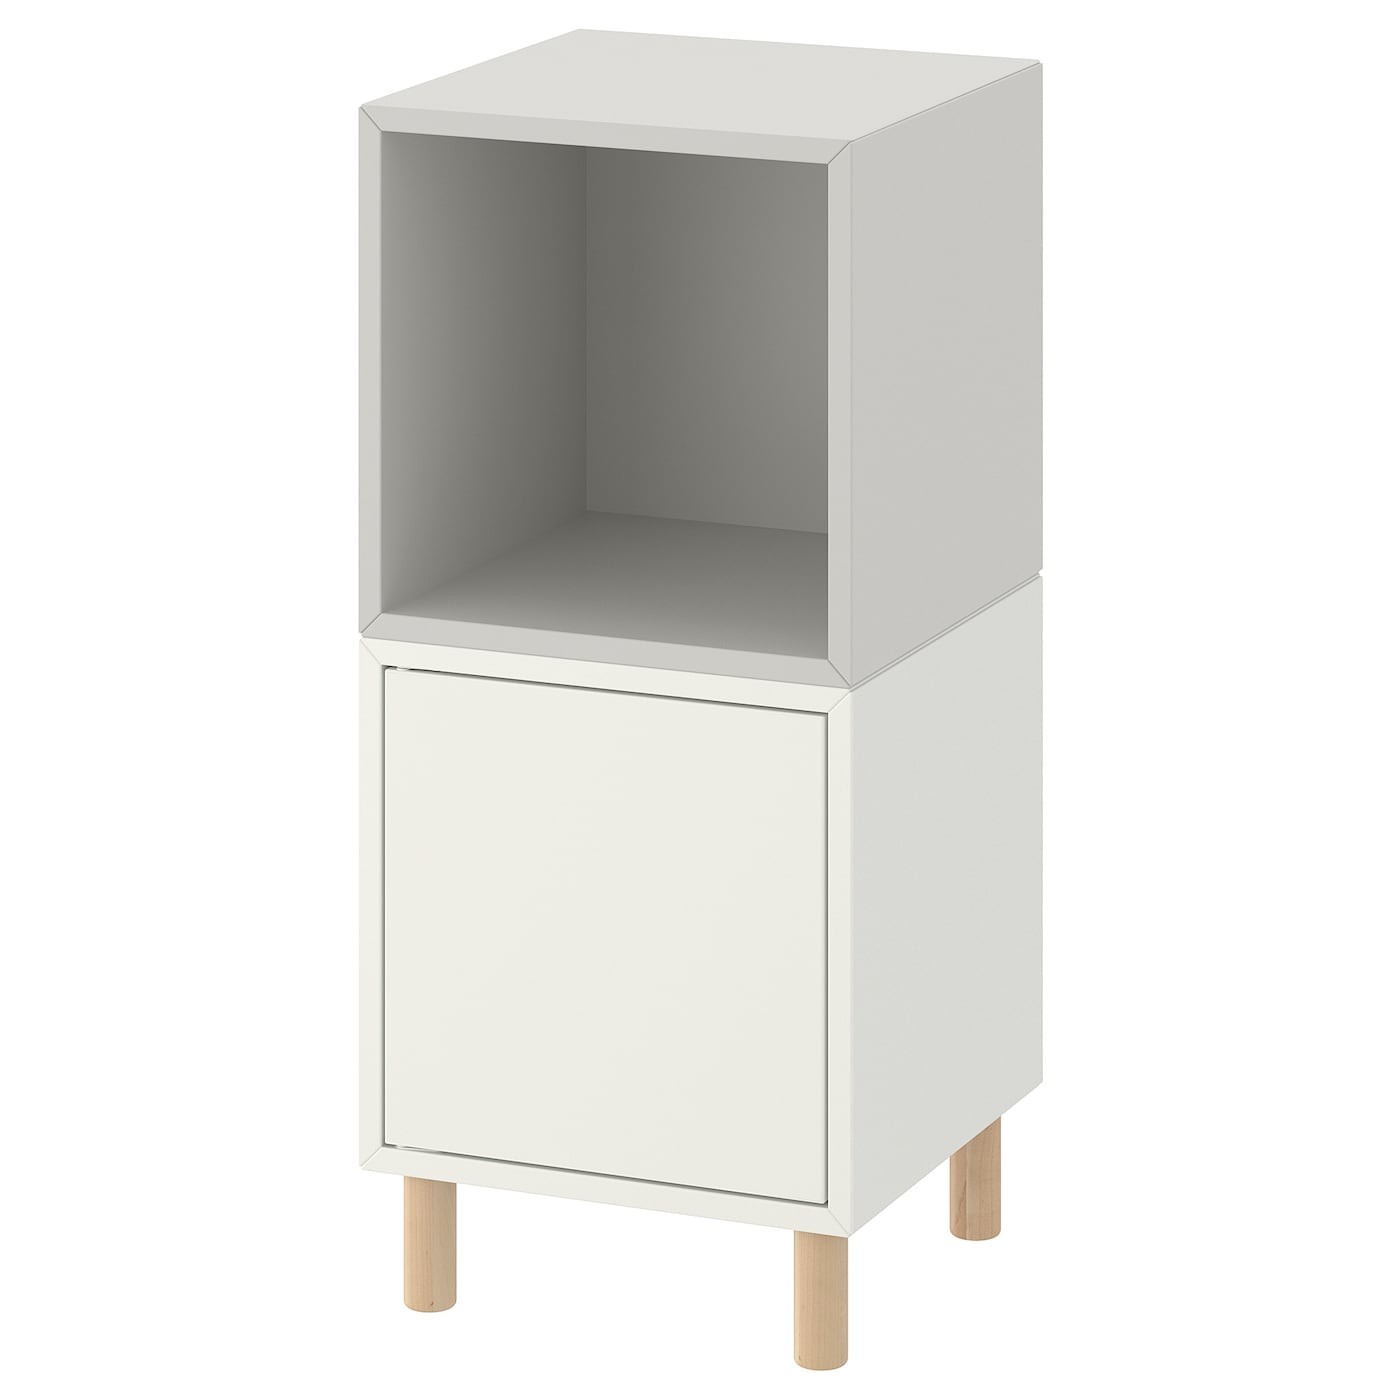 EKET Cabinet combination with legs